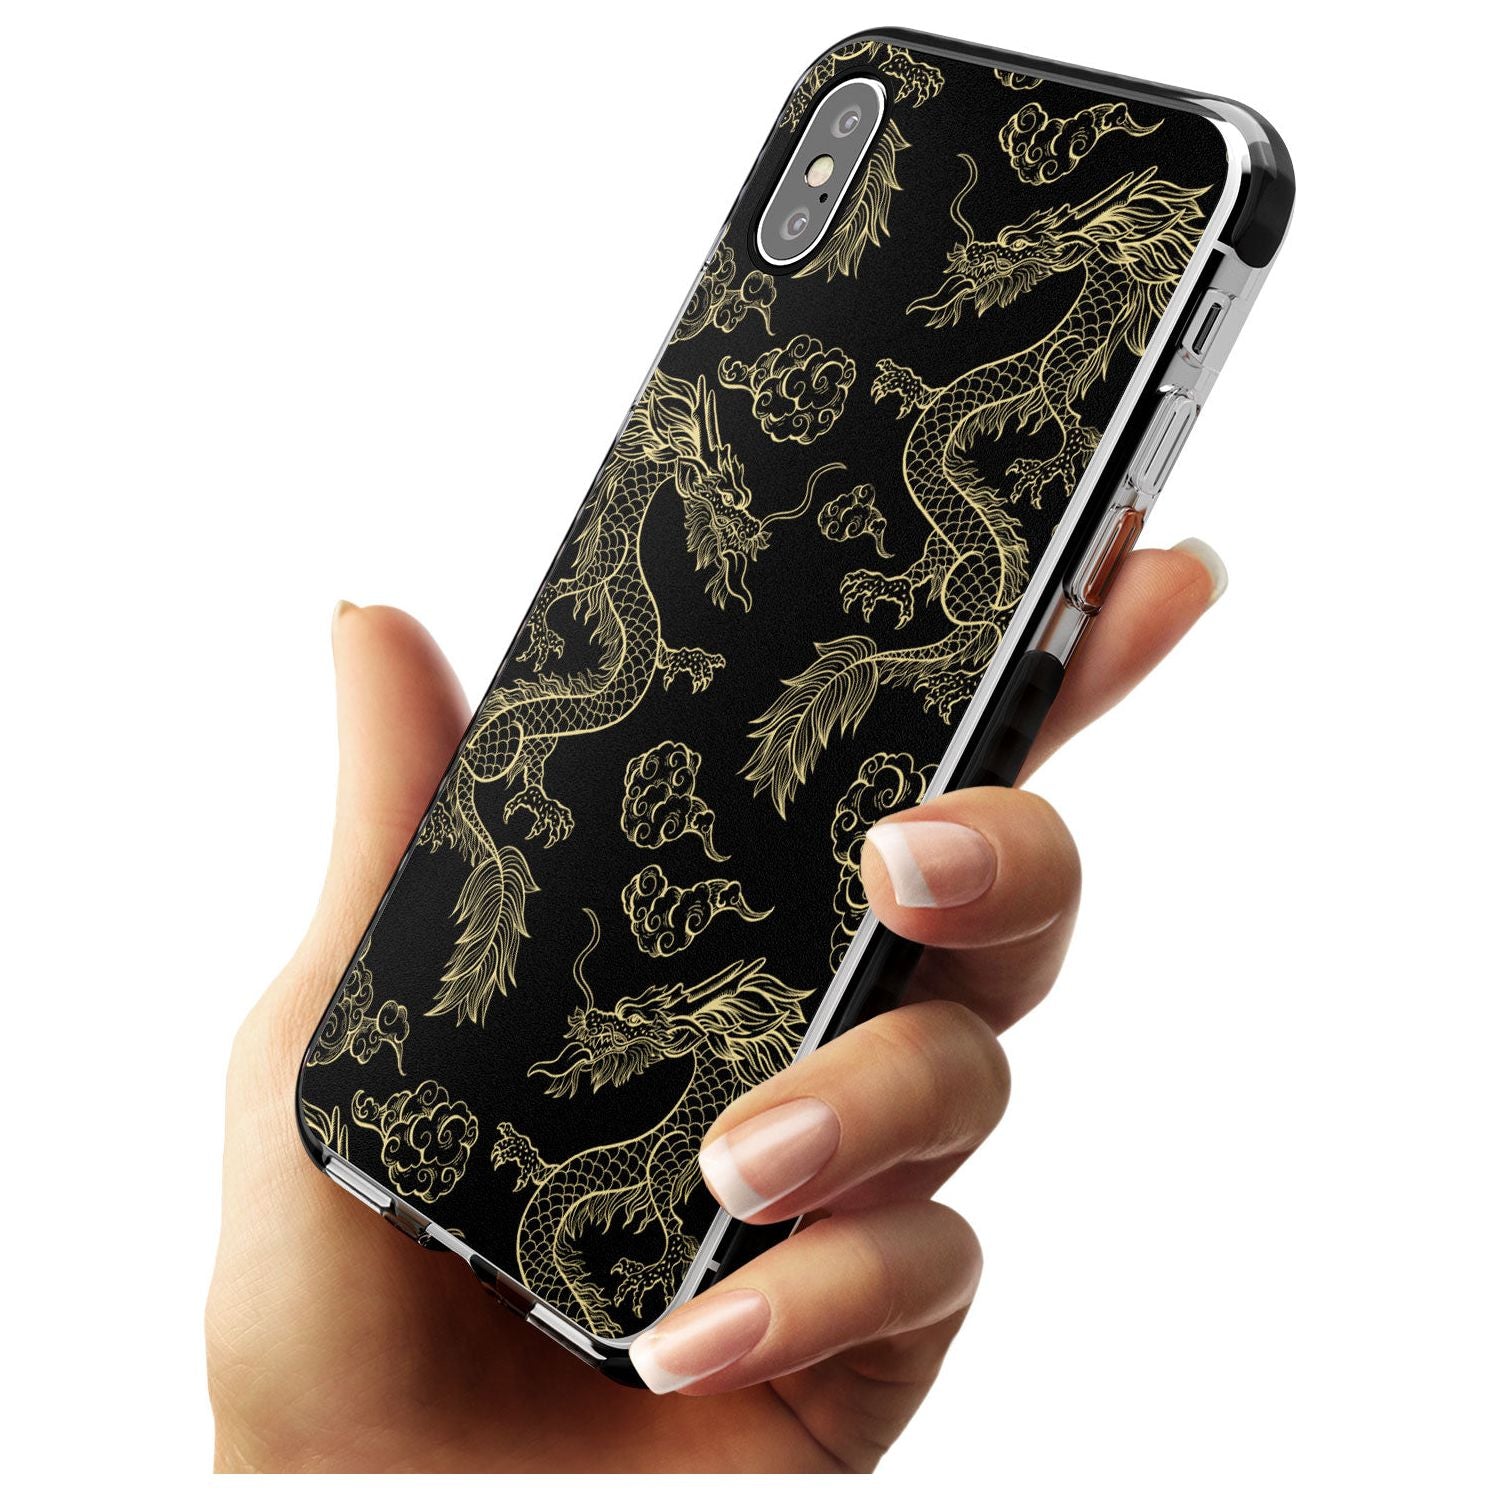 Black and Gold Dragon Pattern Black Impact Phone Case for iPhone X XS Max XR